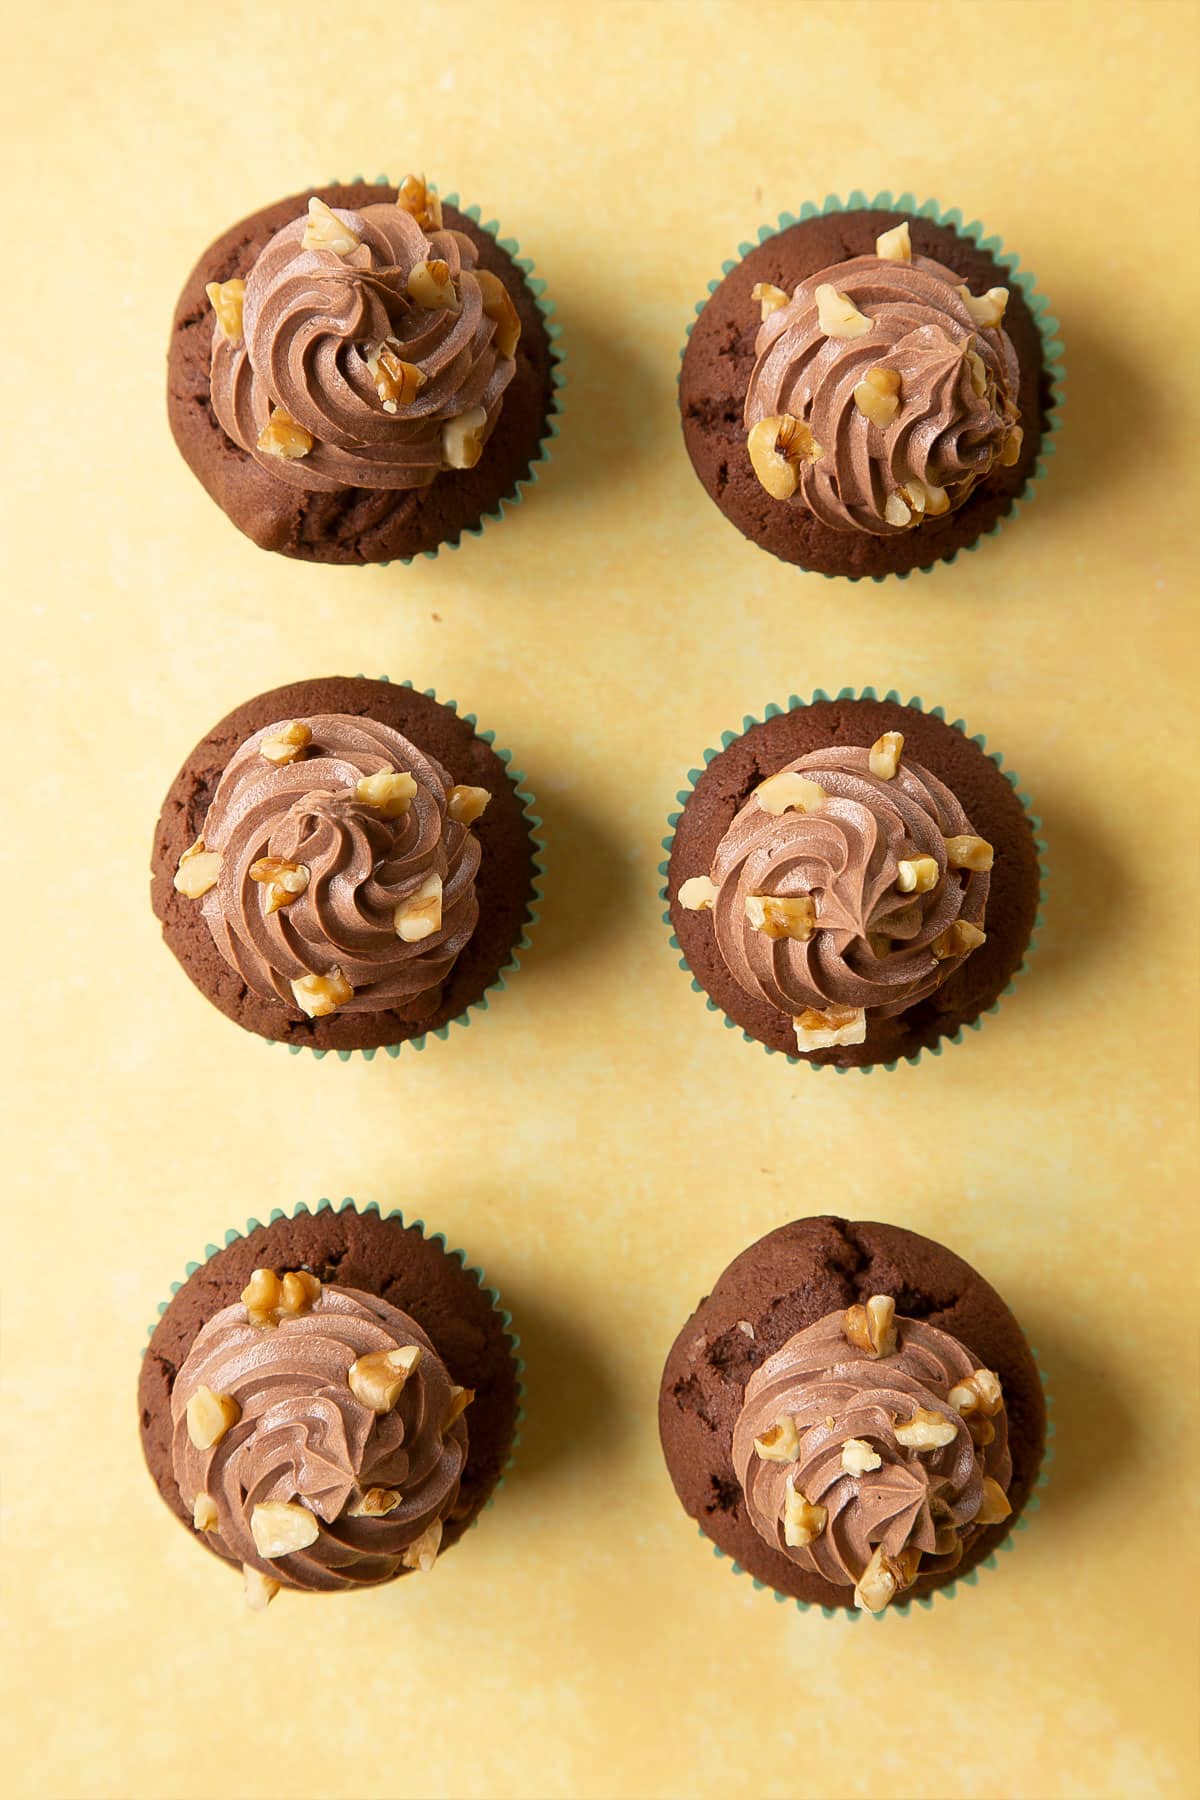 Chocolate walnut cupcakes with chocolate frosting piped on top and chopped walnuts scattered on the frosting.